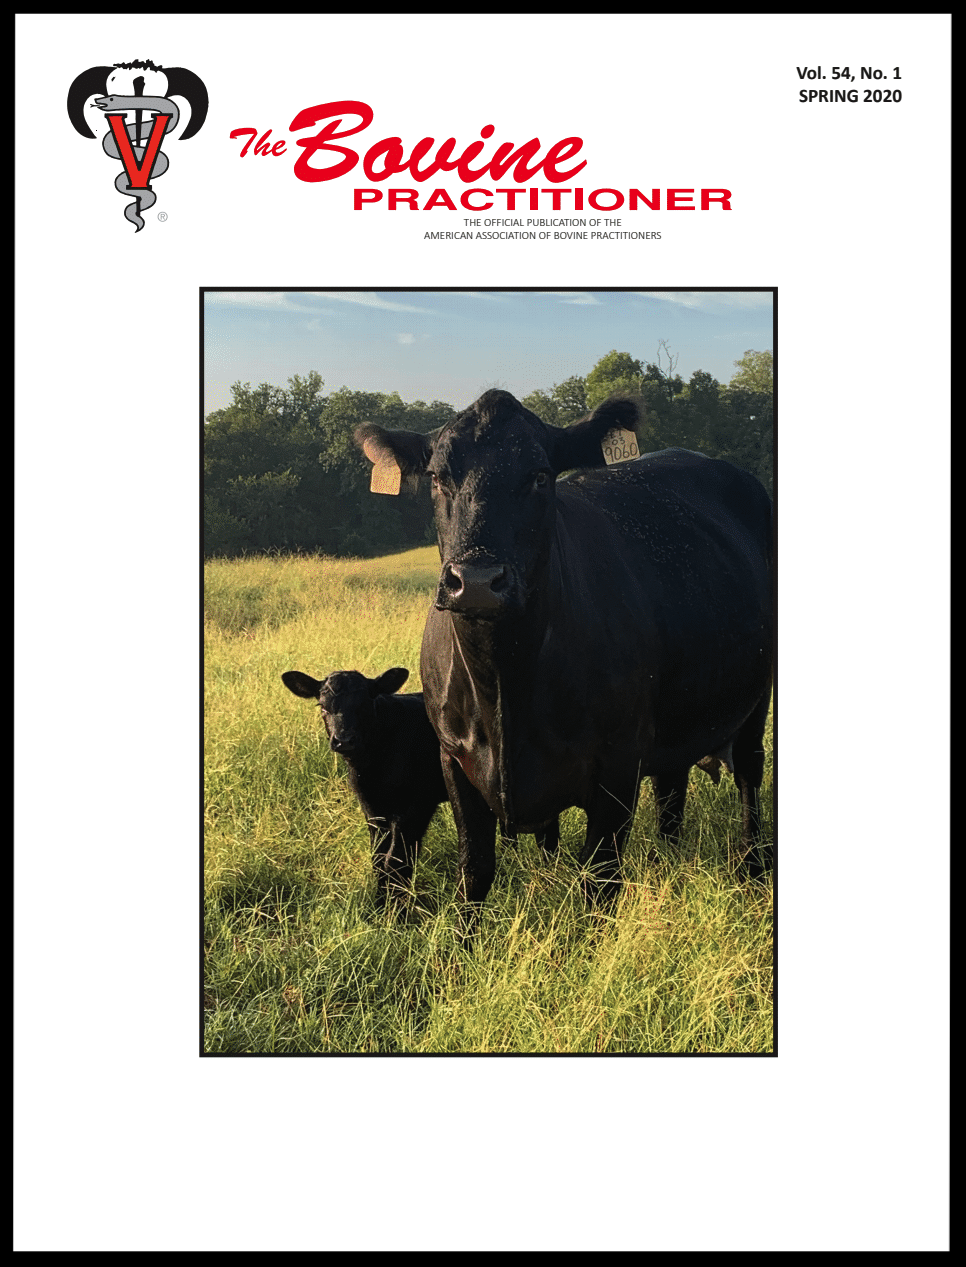 Cover image of Volume 54, No. 1 of the Bovine Practitioner: a photo of an Angus cow with her calf by her side, both gazing at the photographer. The calf is very small, only a little taller than the grass both cows are standing in.